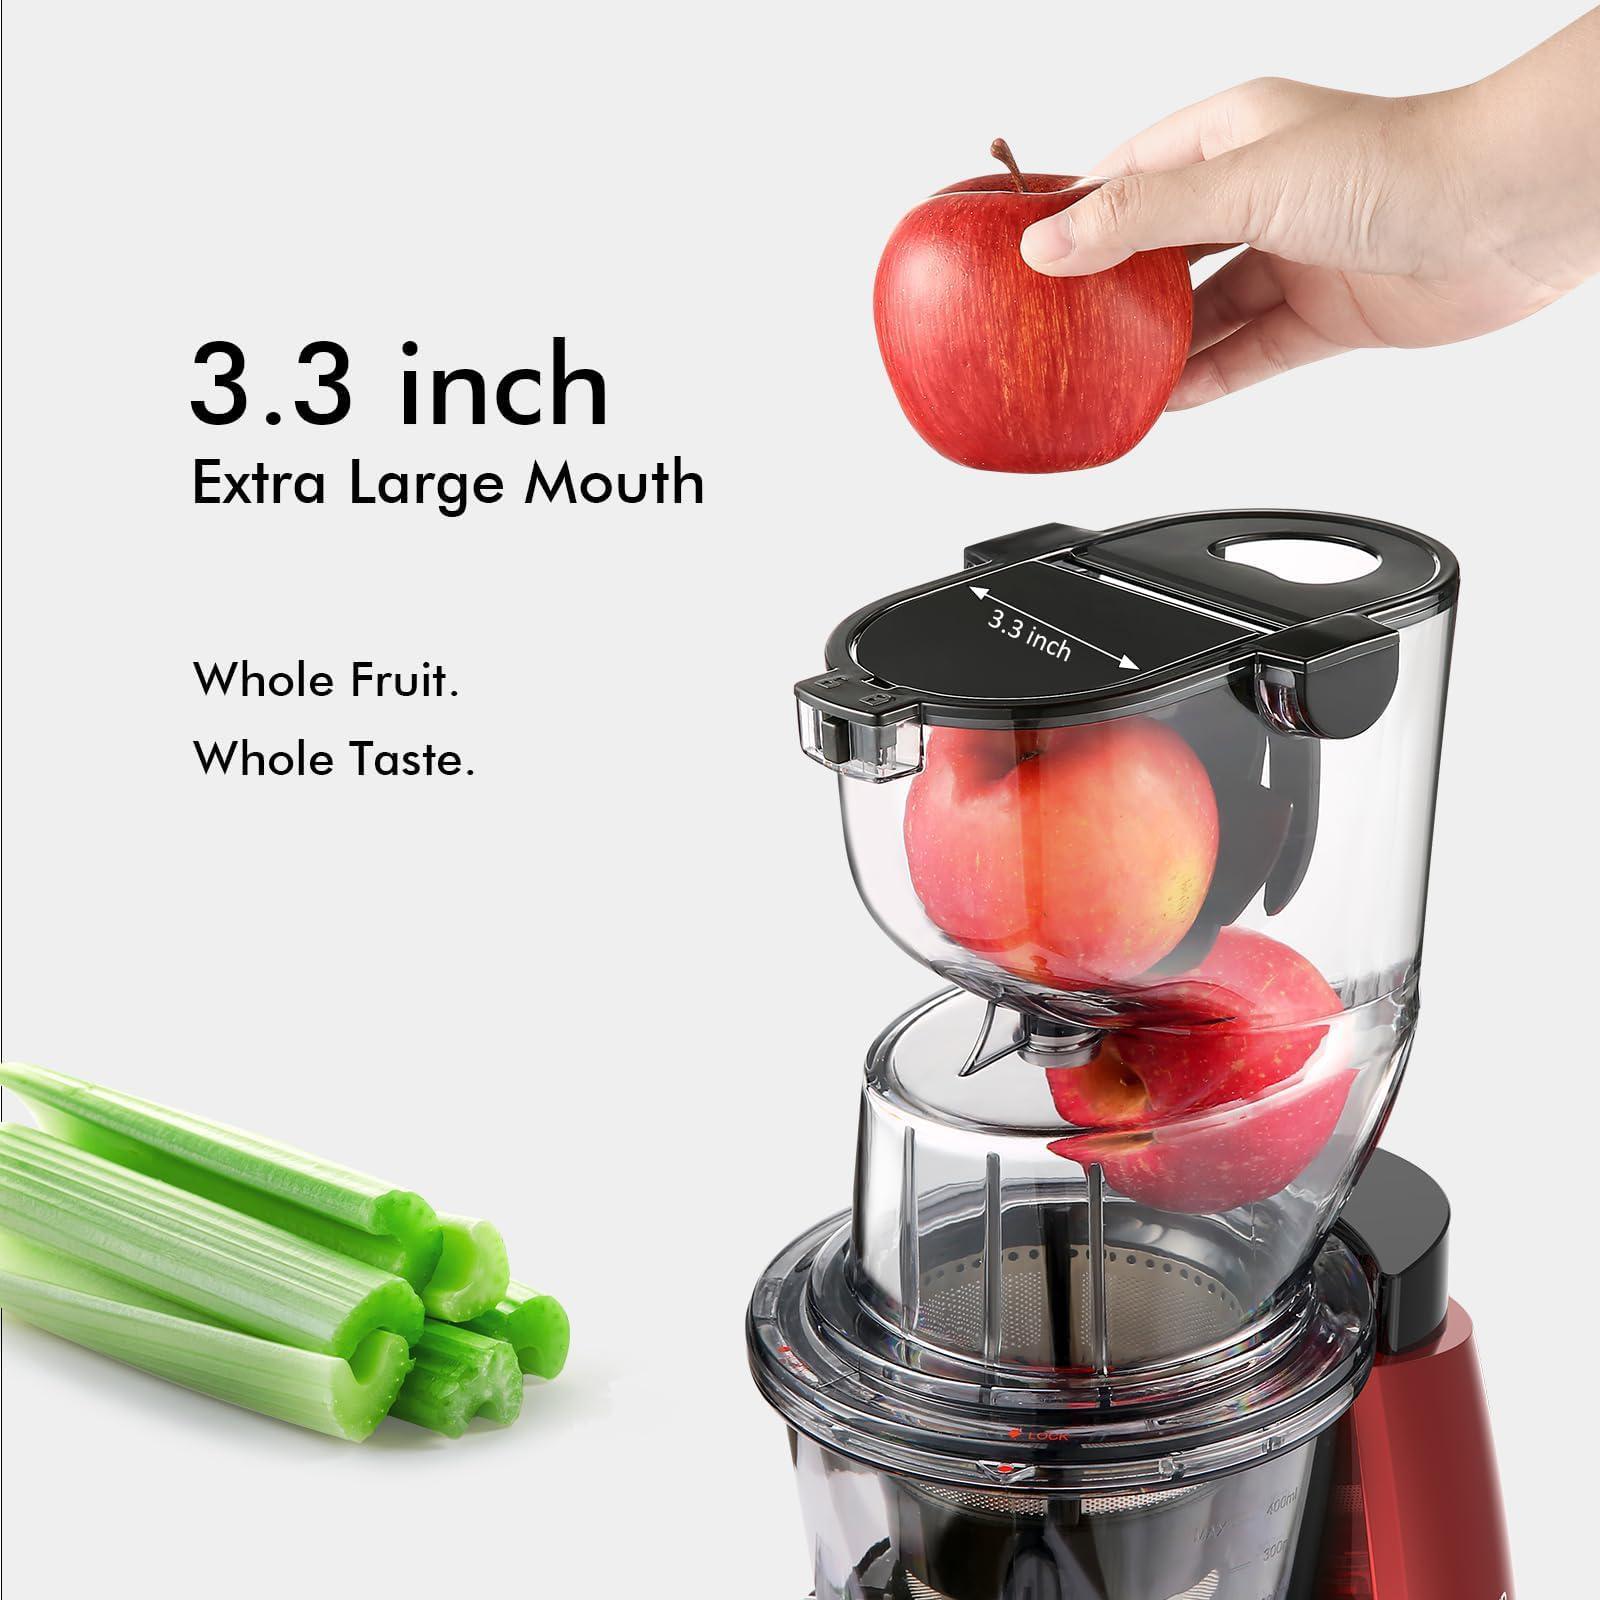 sifene cold press juicer machines with big 3.3 inch chute, slow juicer extractor maker for whole fruits and vegetables, bpa-f